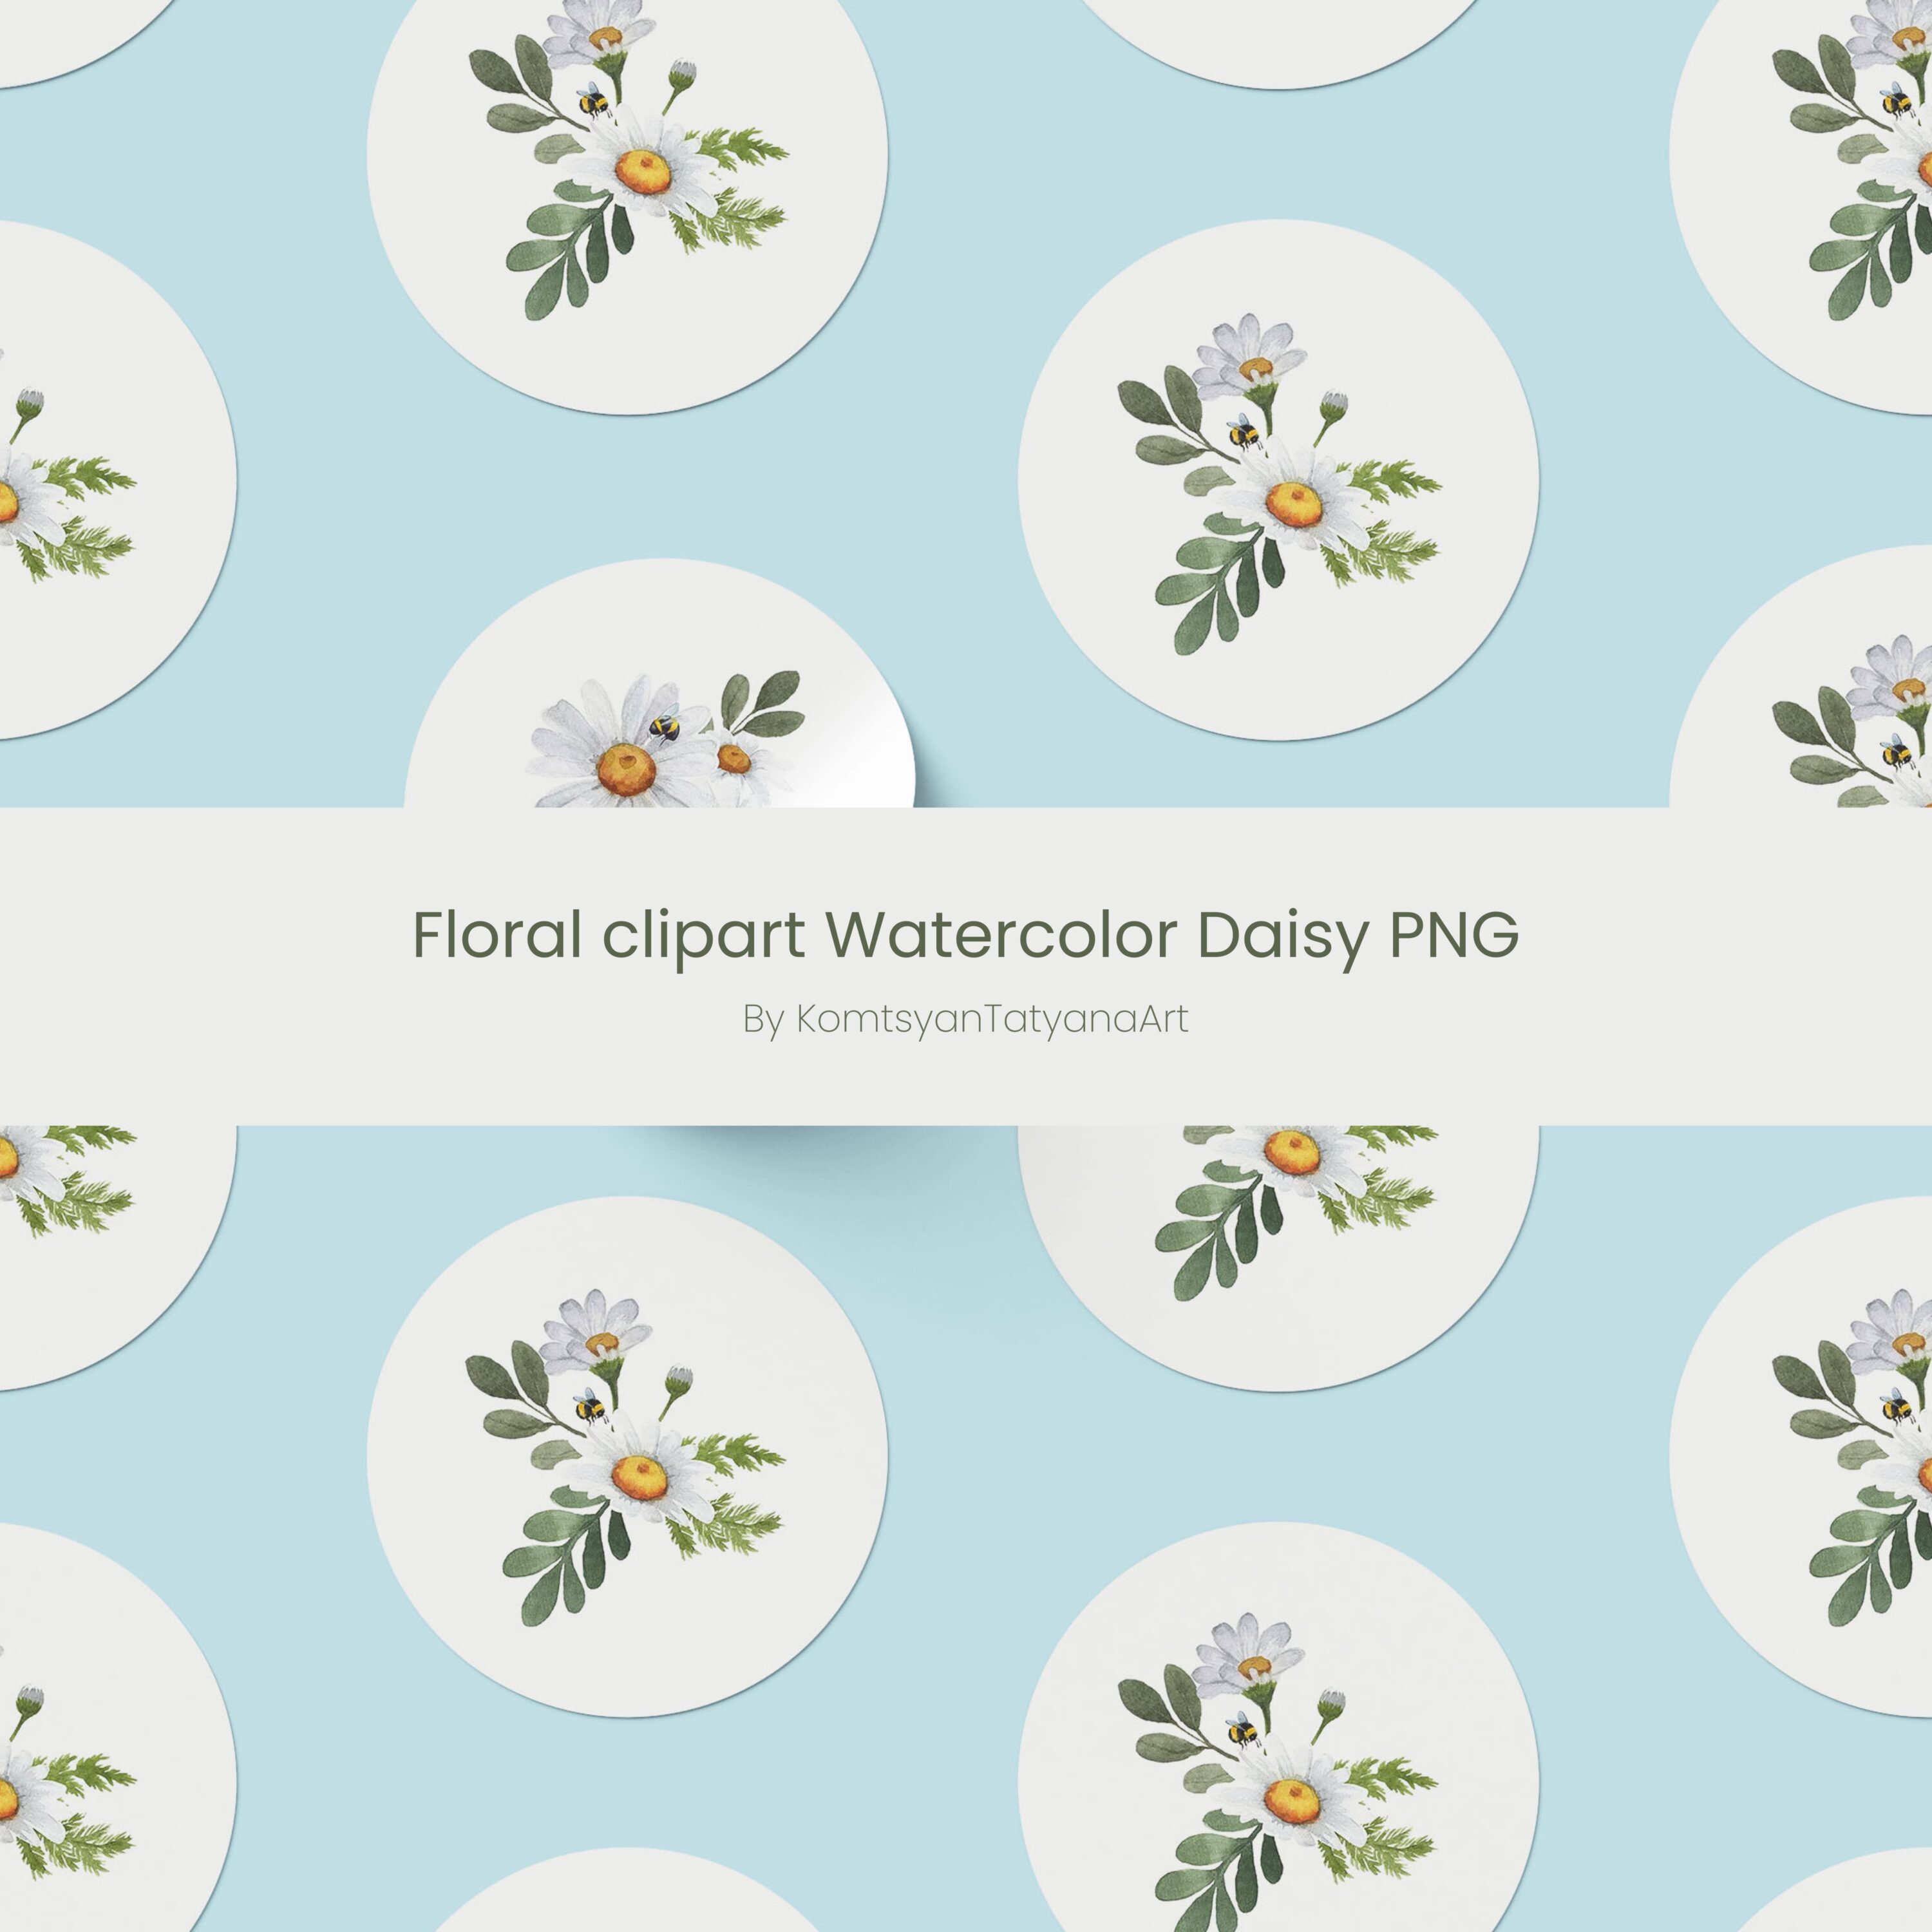 Floral clipart Watercolor Daisy PNG.